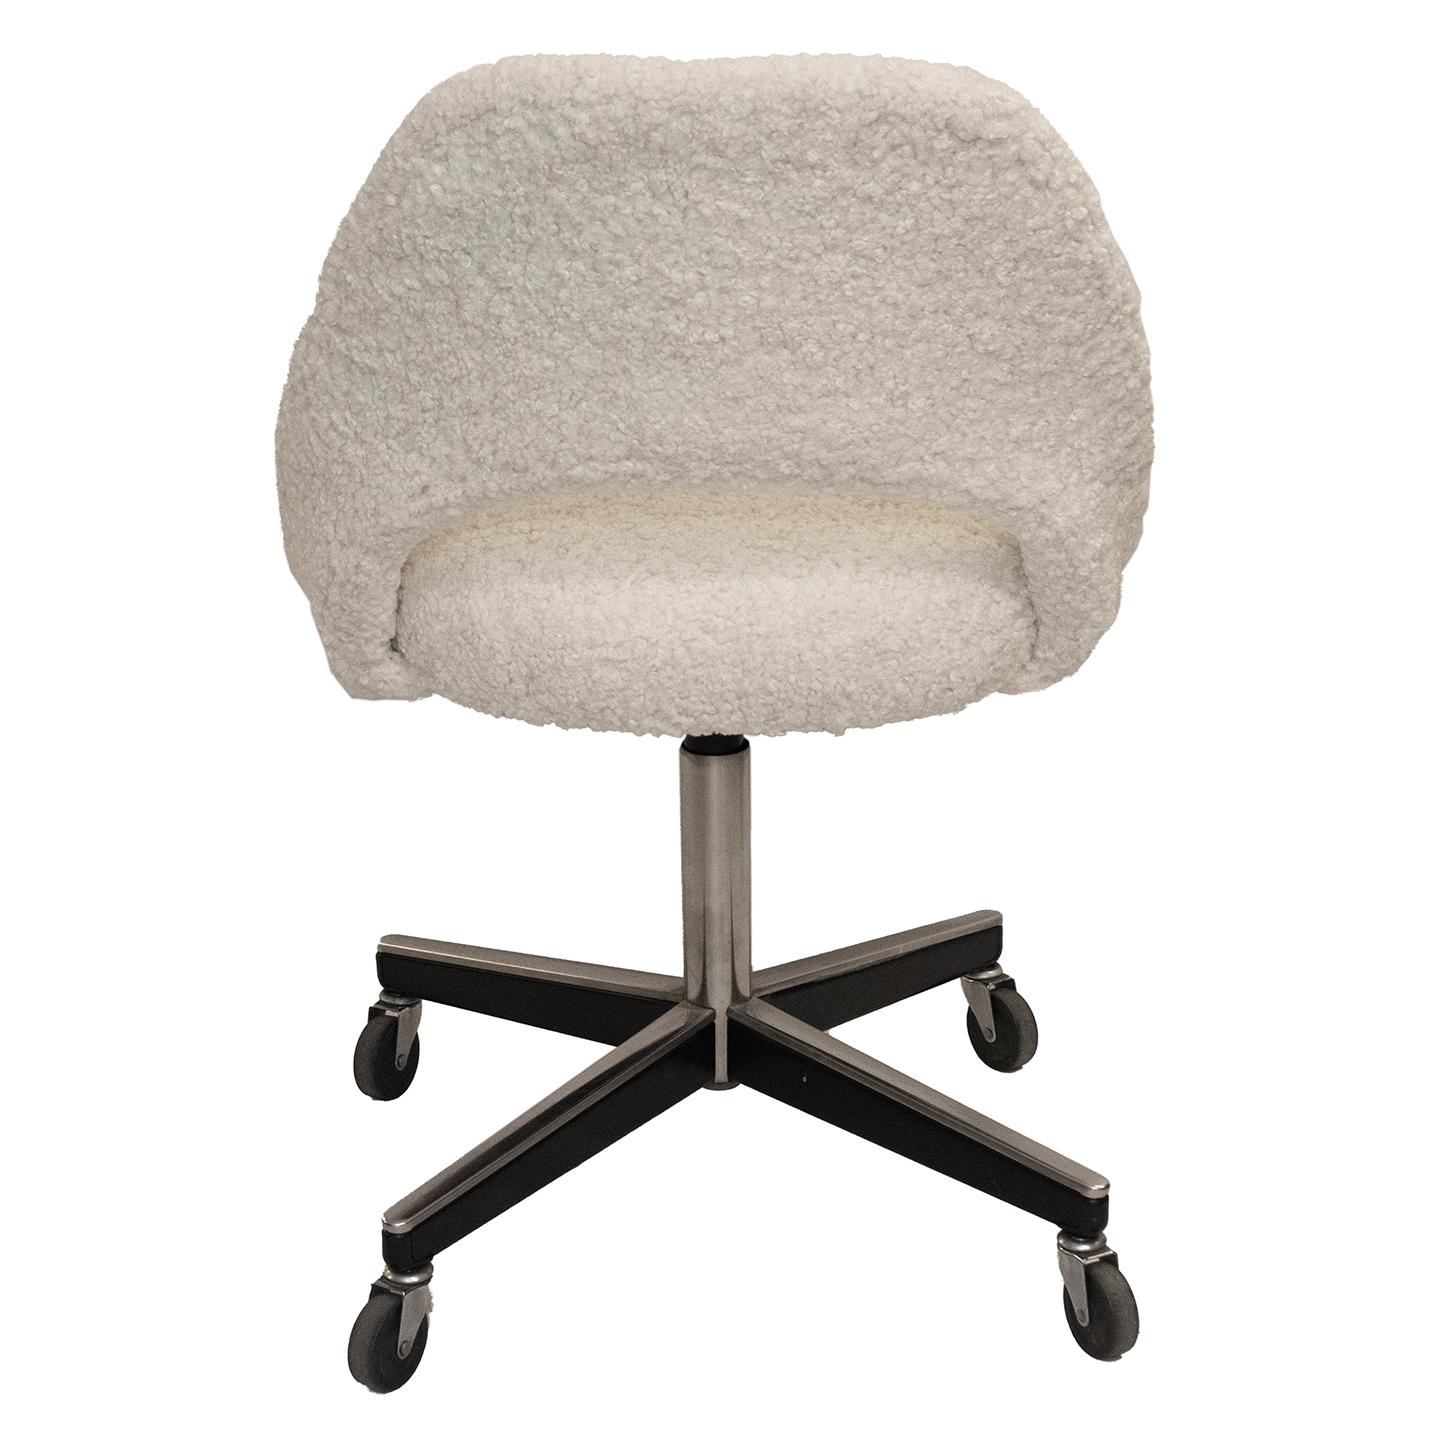 Machine-Made Vintage Knoll Saarinen Desk Swivel Chair Upholstered in White Faux Shearling